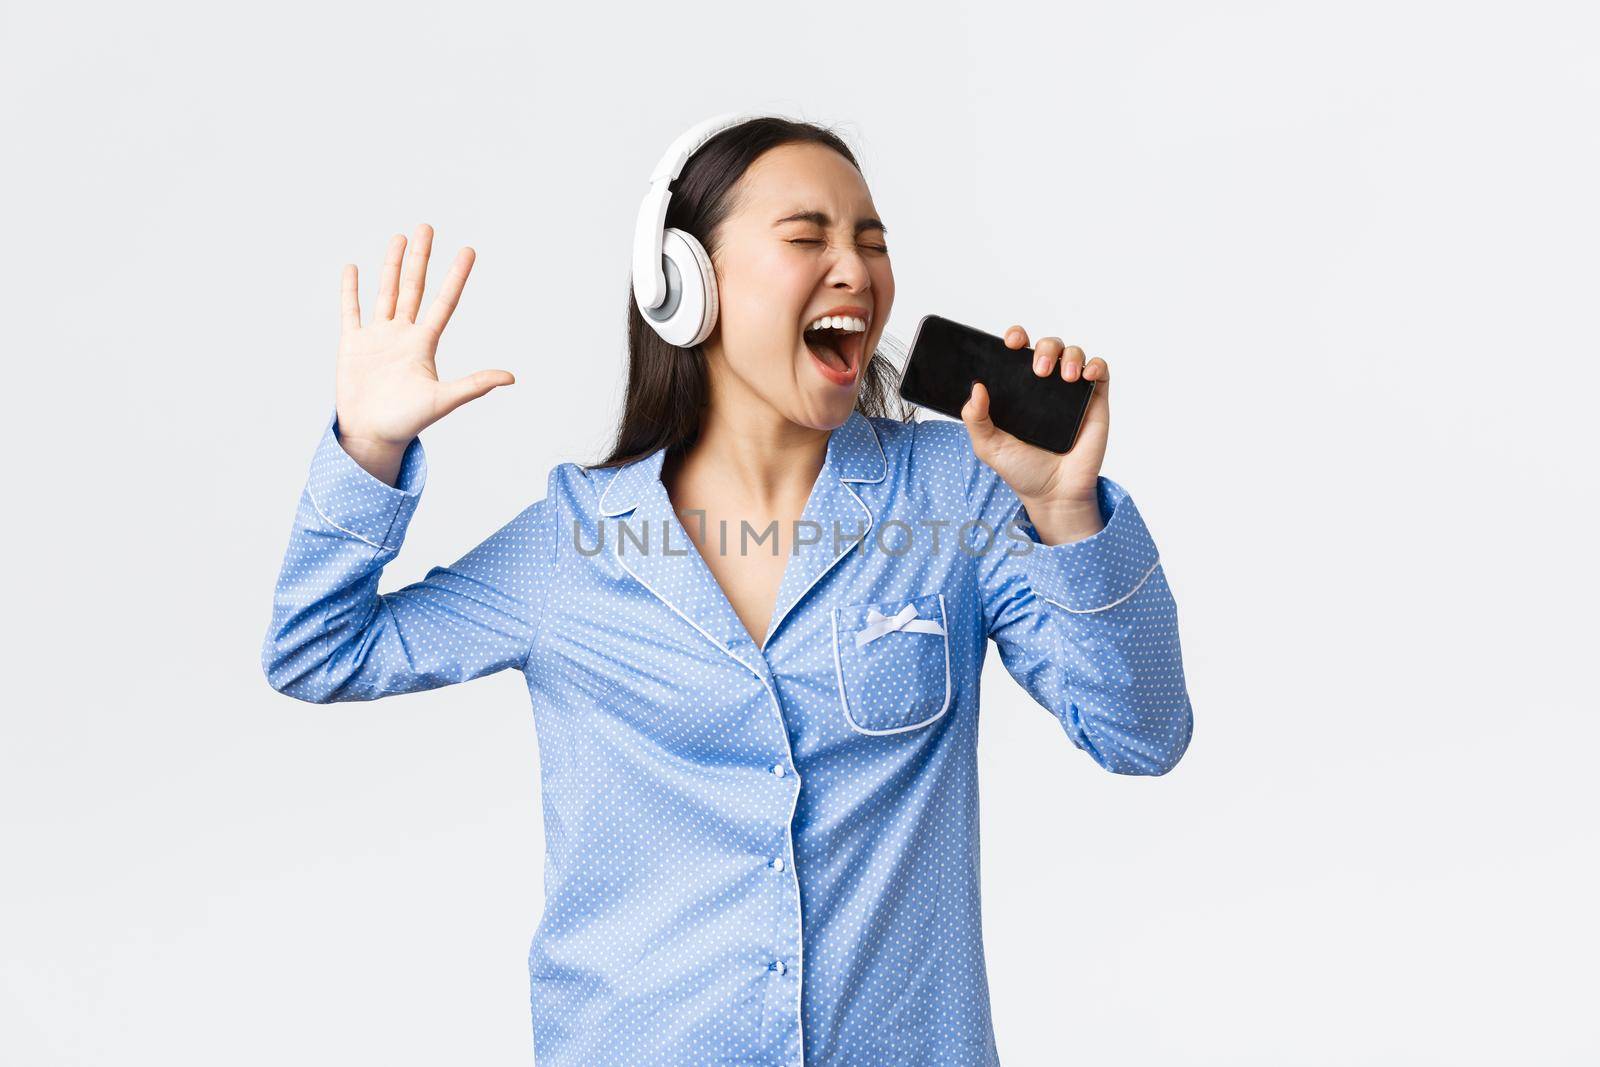 Home leisure, weekends and lifestyle concept. Excited and carefree asian girl in pajama, playing karaoke app on smartphone, singing song into mobile phone as wearing headphones, white background.